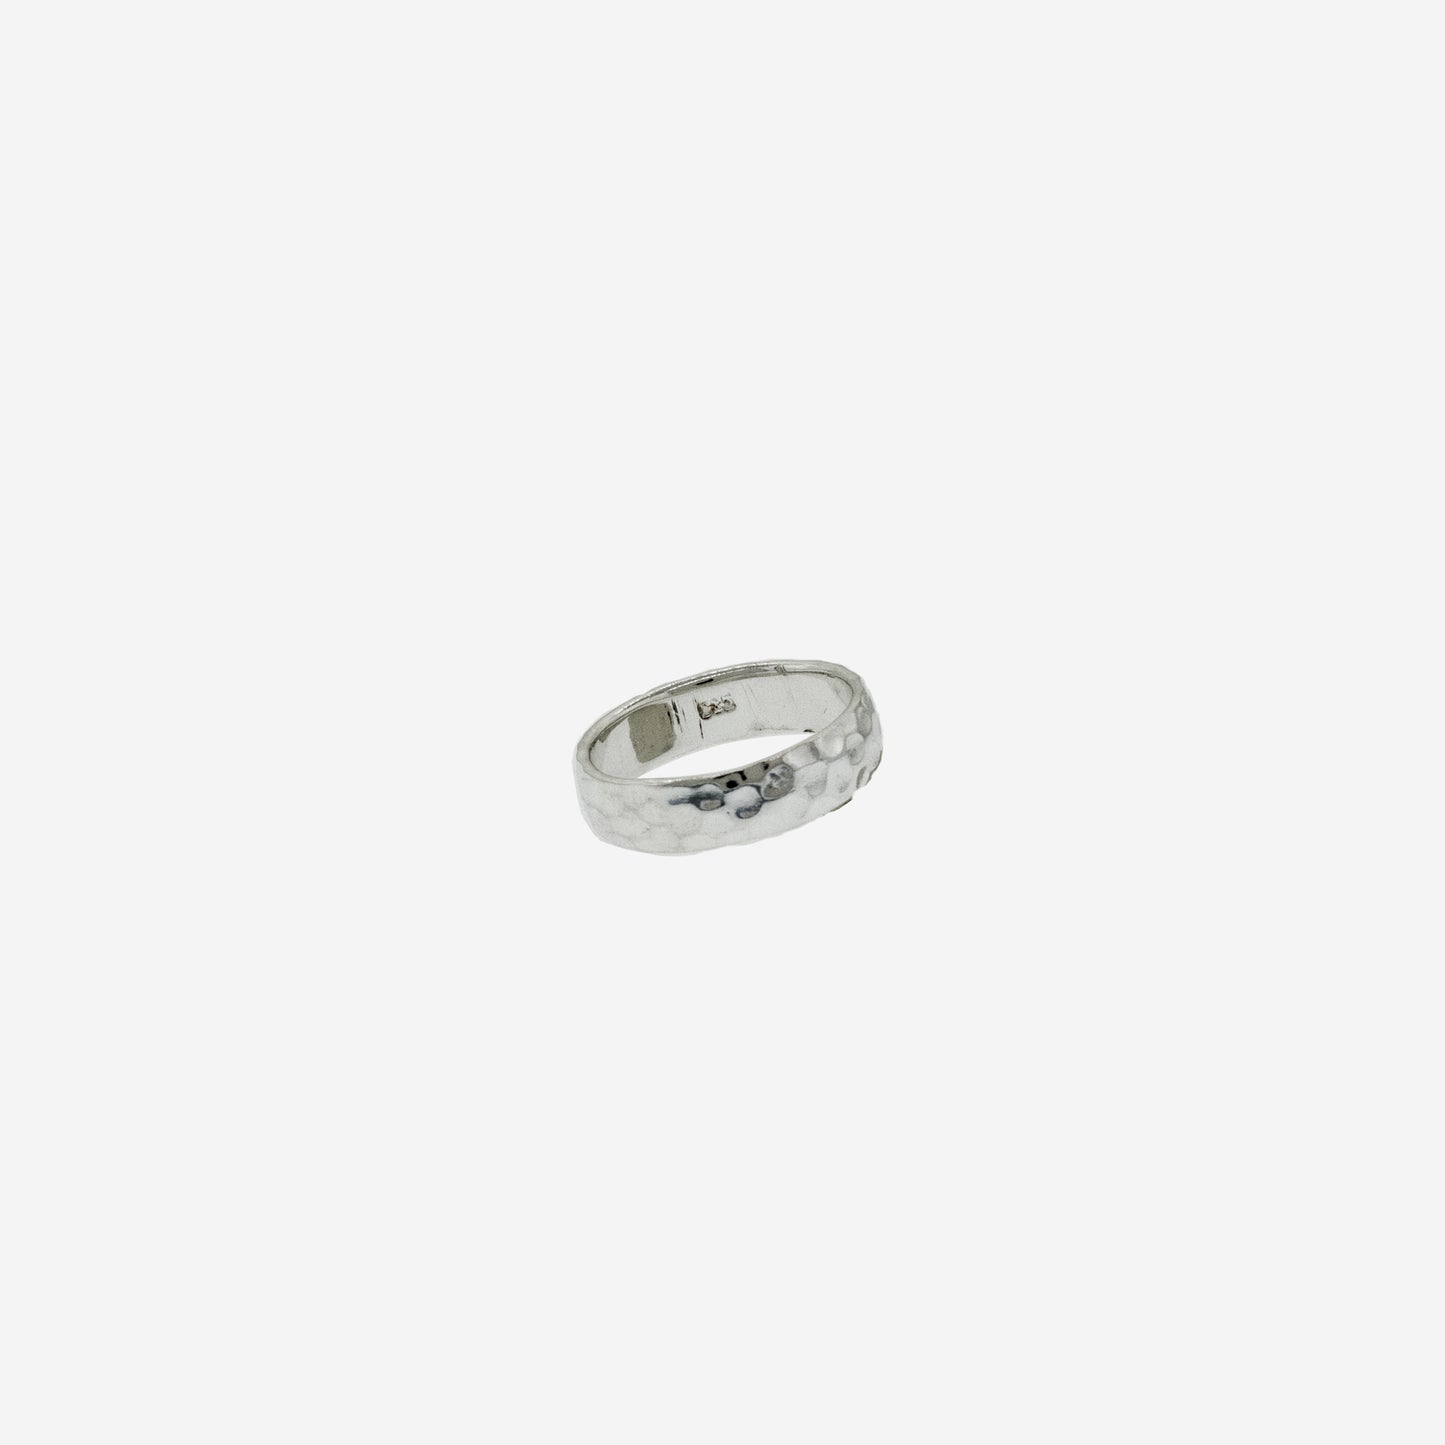 A 4mm Simple Hammered Band Ring on a white background.